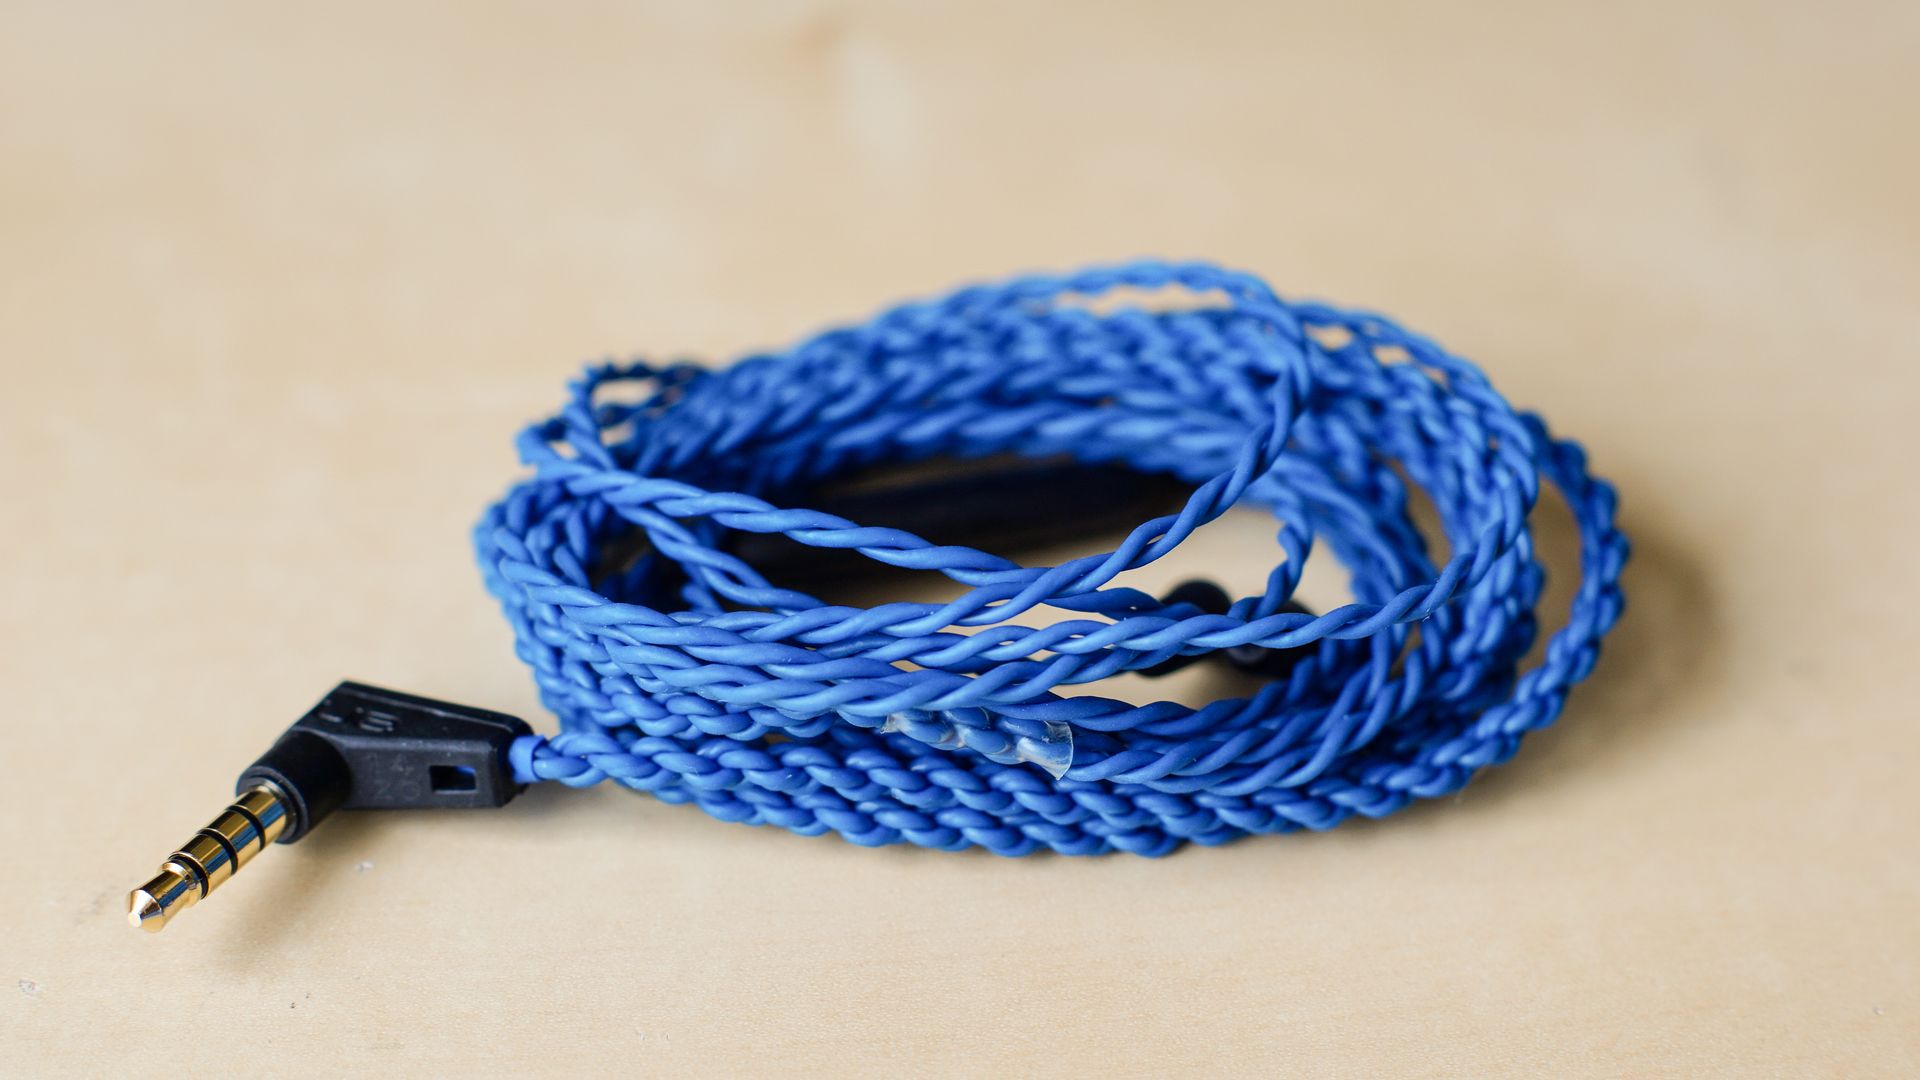 Logitech UE900 Cable – The best value MMCX Cable? – Everyday